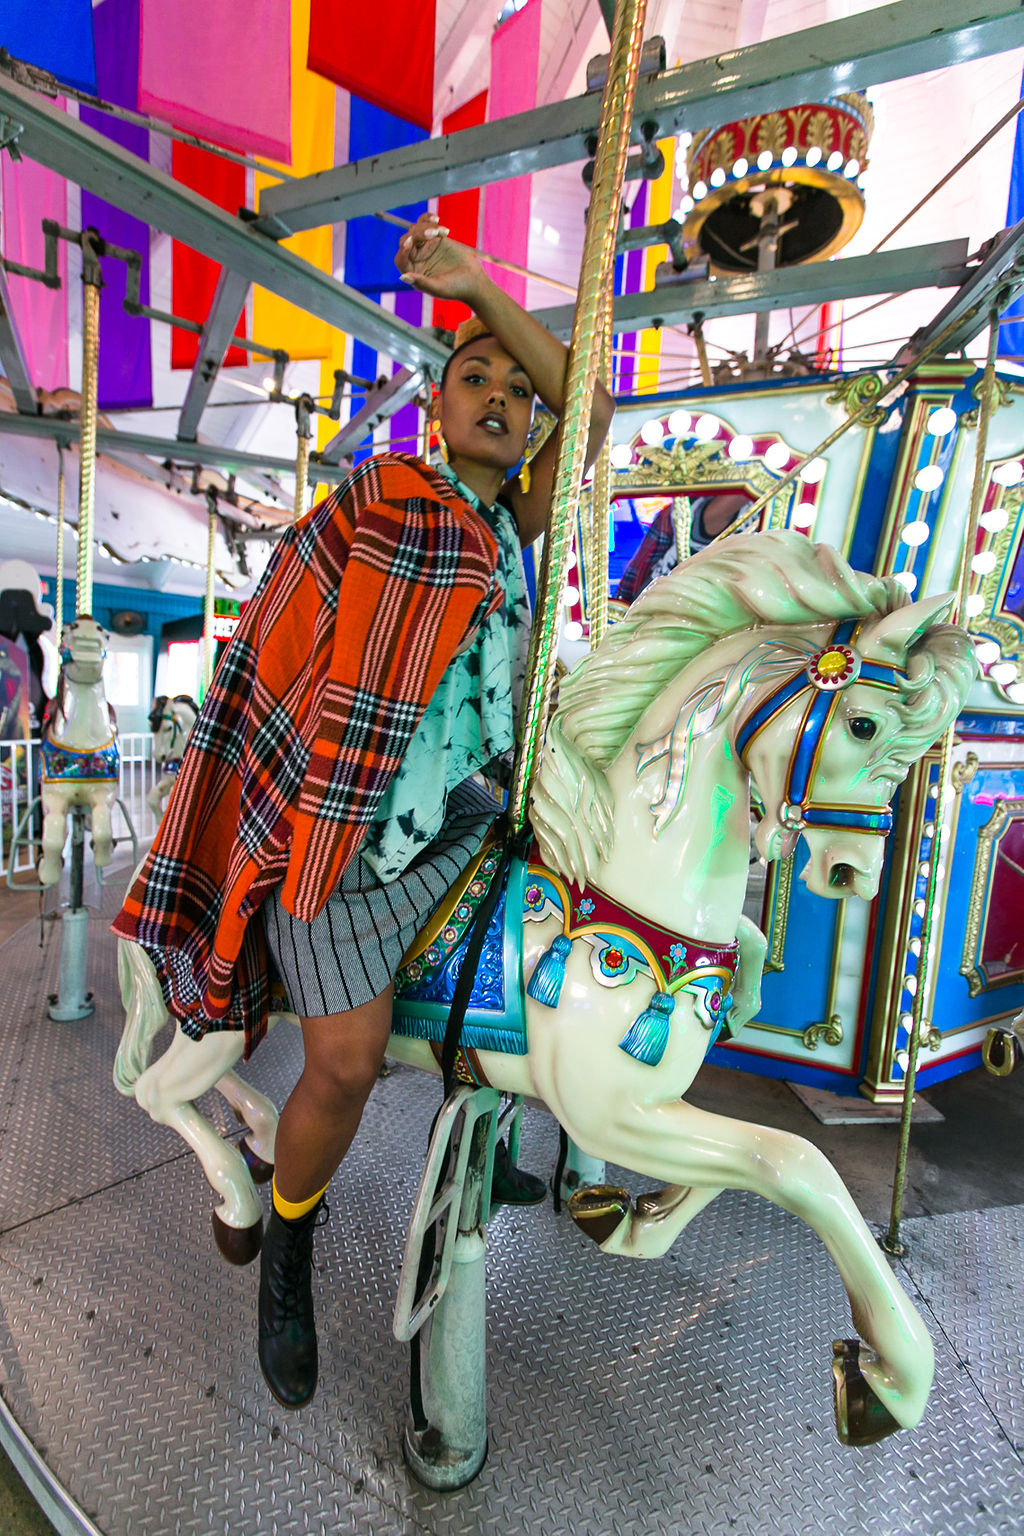 merry go round-fashion photoshoot-nordstrom rack-susina-long beach marina-rsee-xmmtt-wear who you are